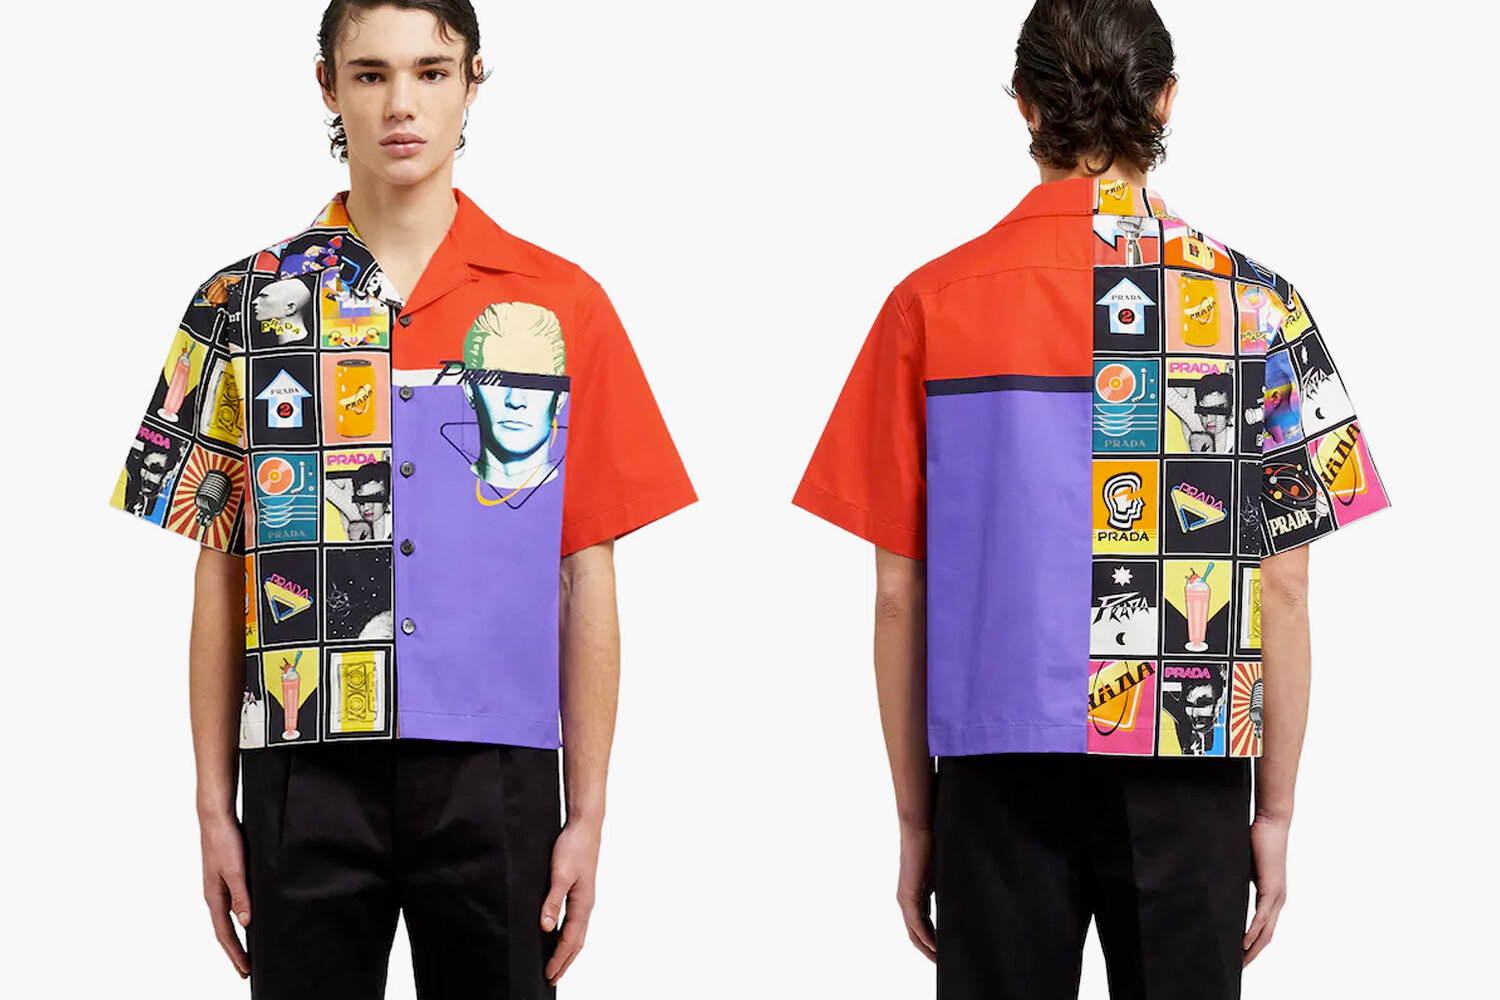 Prada's Summer 20 Double Match Bowling Shirts — Official Roses